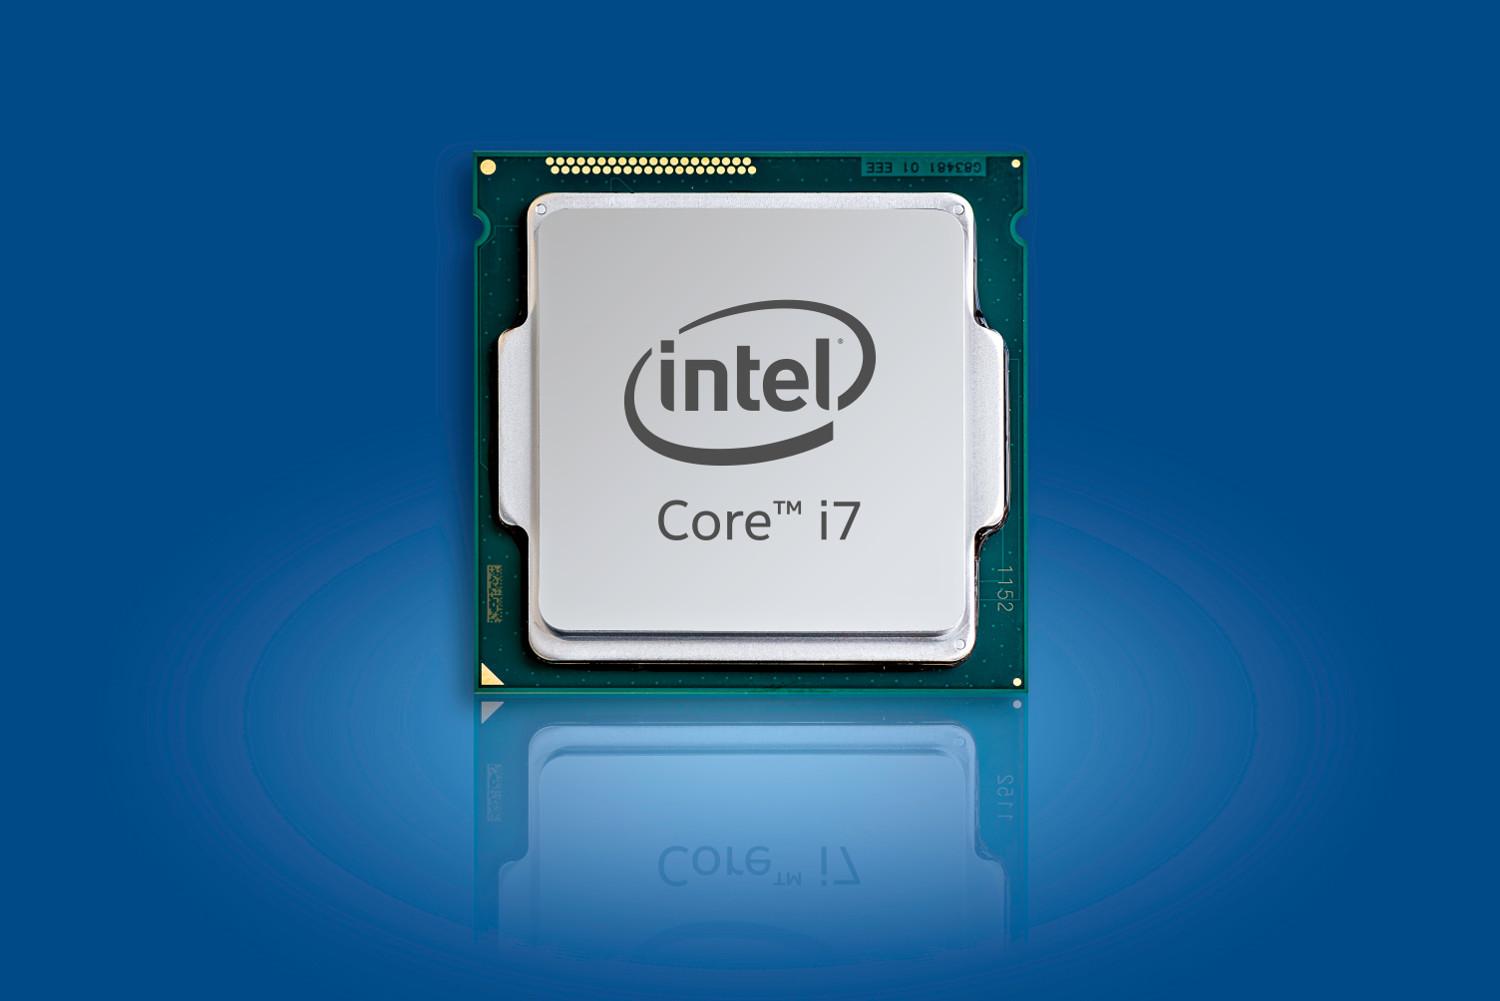 Intel shows 5th-generation "Broadwell" Core chips | Trends